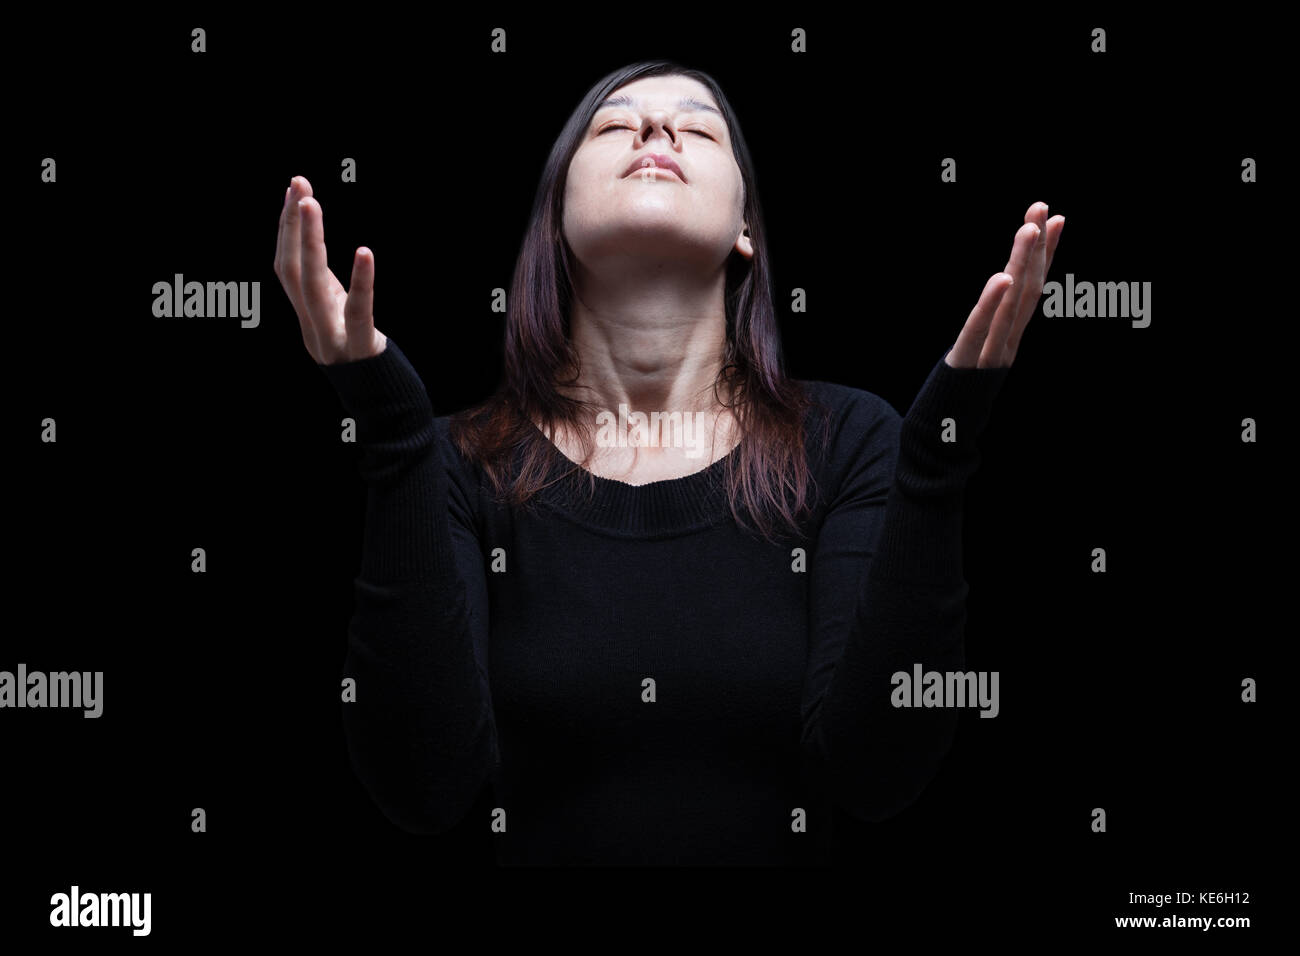 Mourning woman praying with arms outstretched in worship to god. Looking up, eyes closed in suffering. Black background / faith sad grief mourning Stock Photo